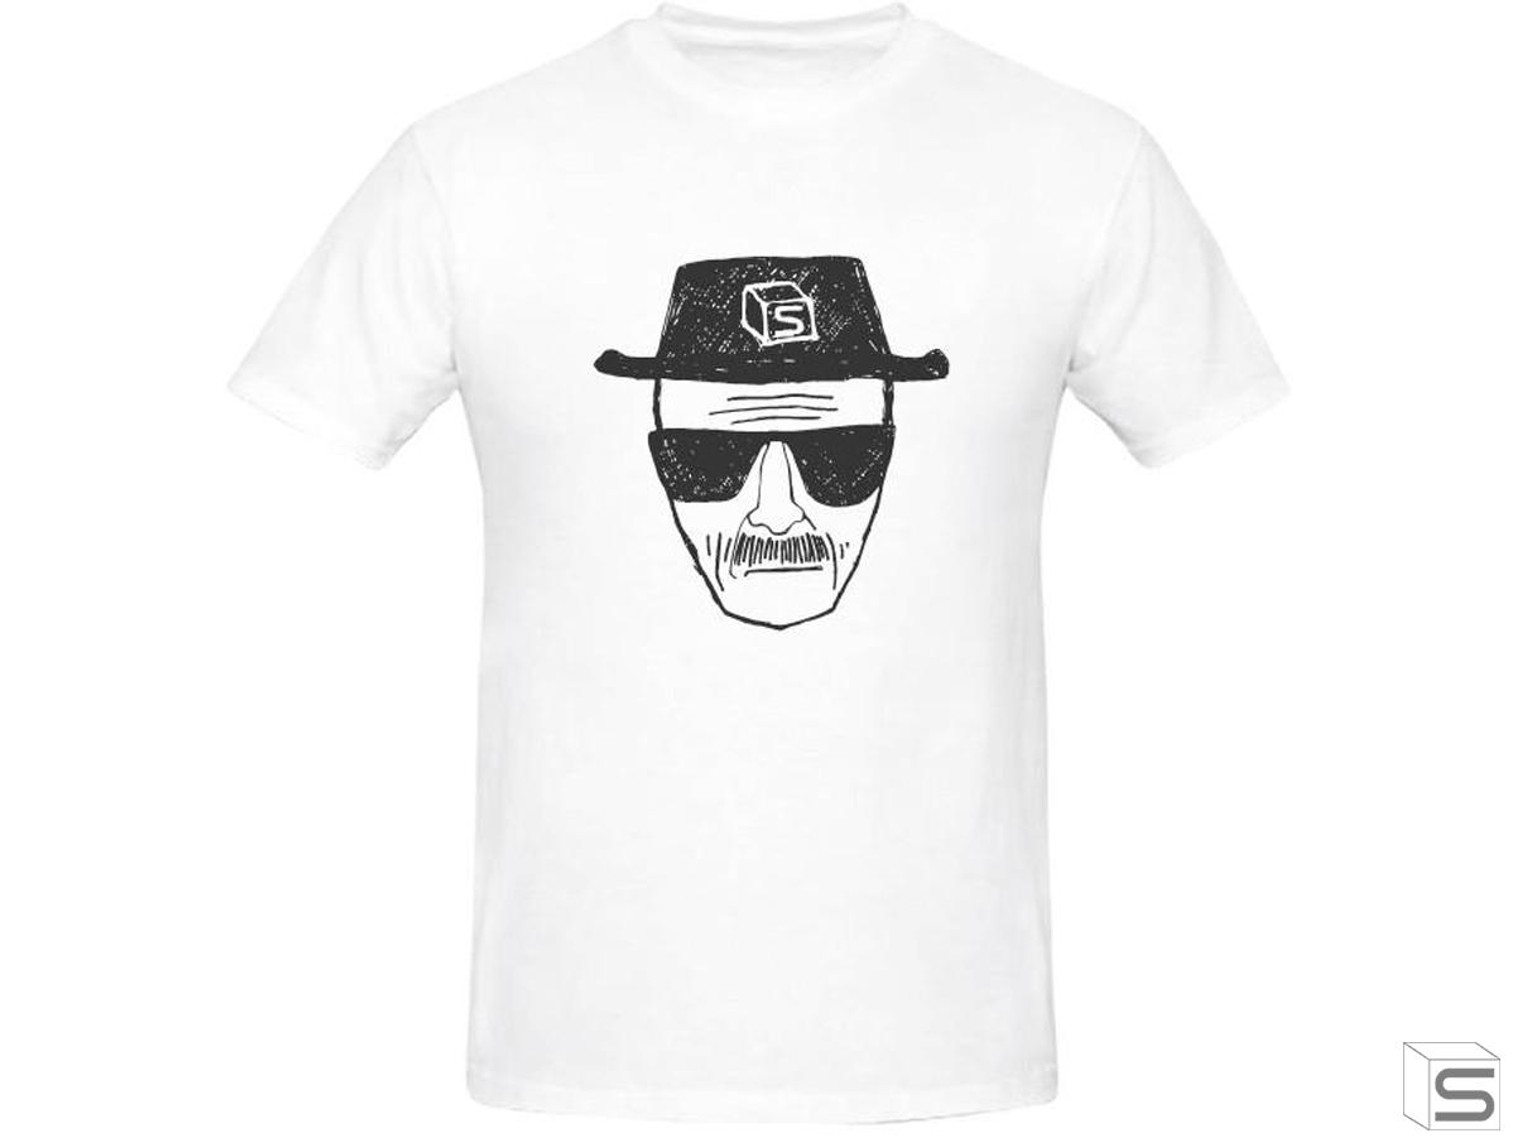 Salient Arms "Heisenberg" Screen Printed Cotton T-Shirt (Size: Womens Small)